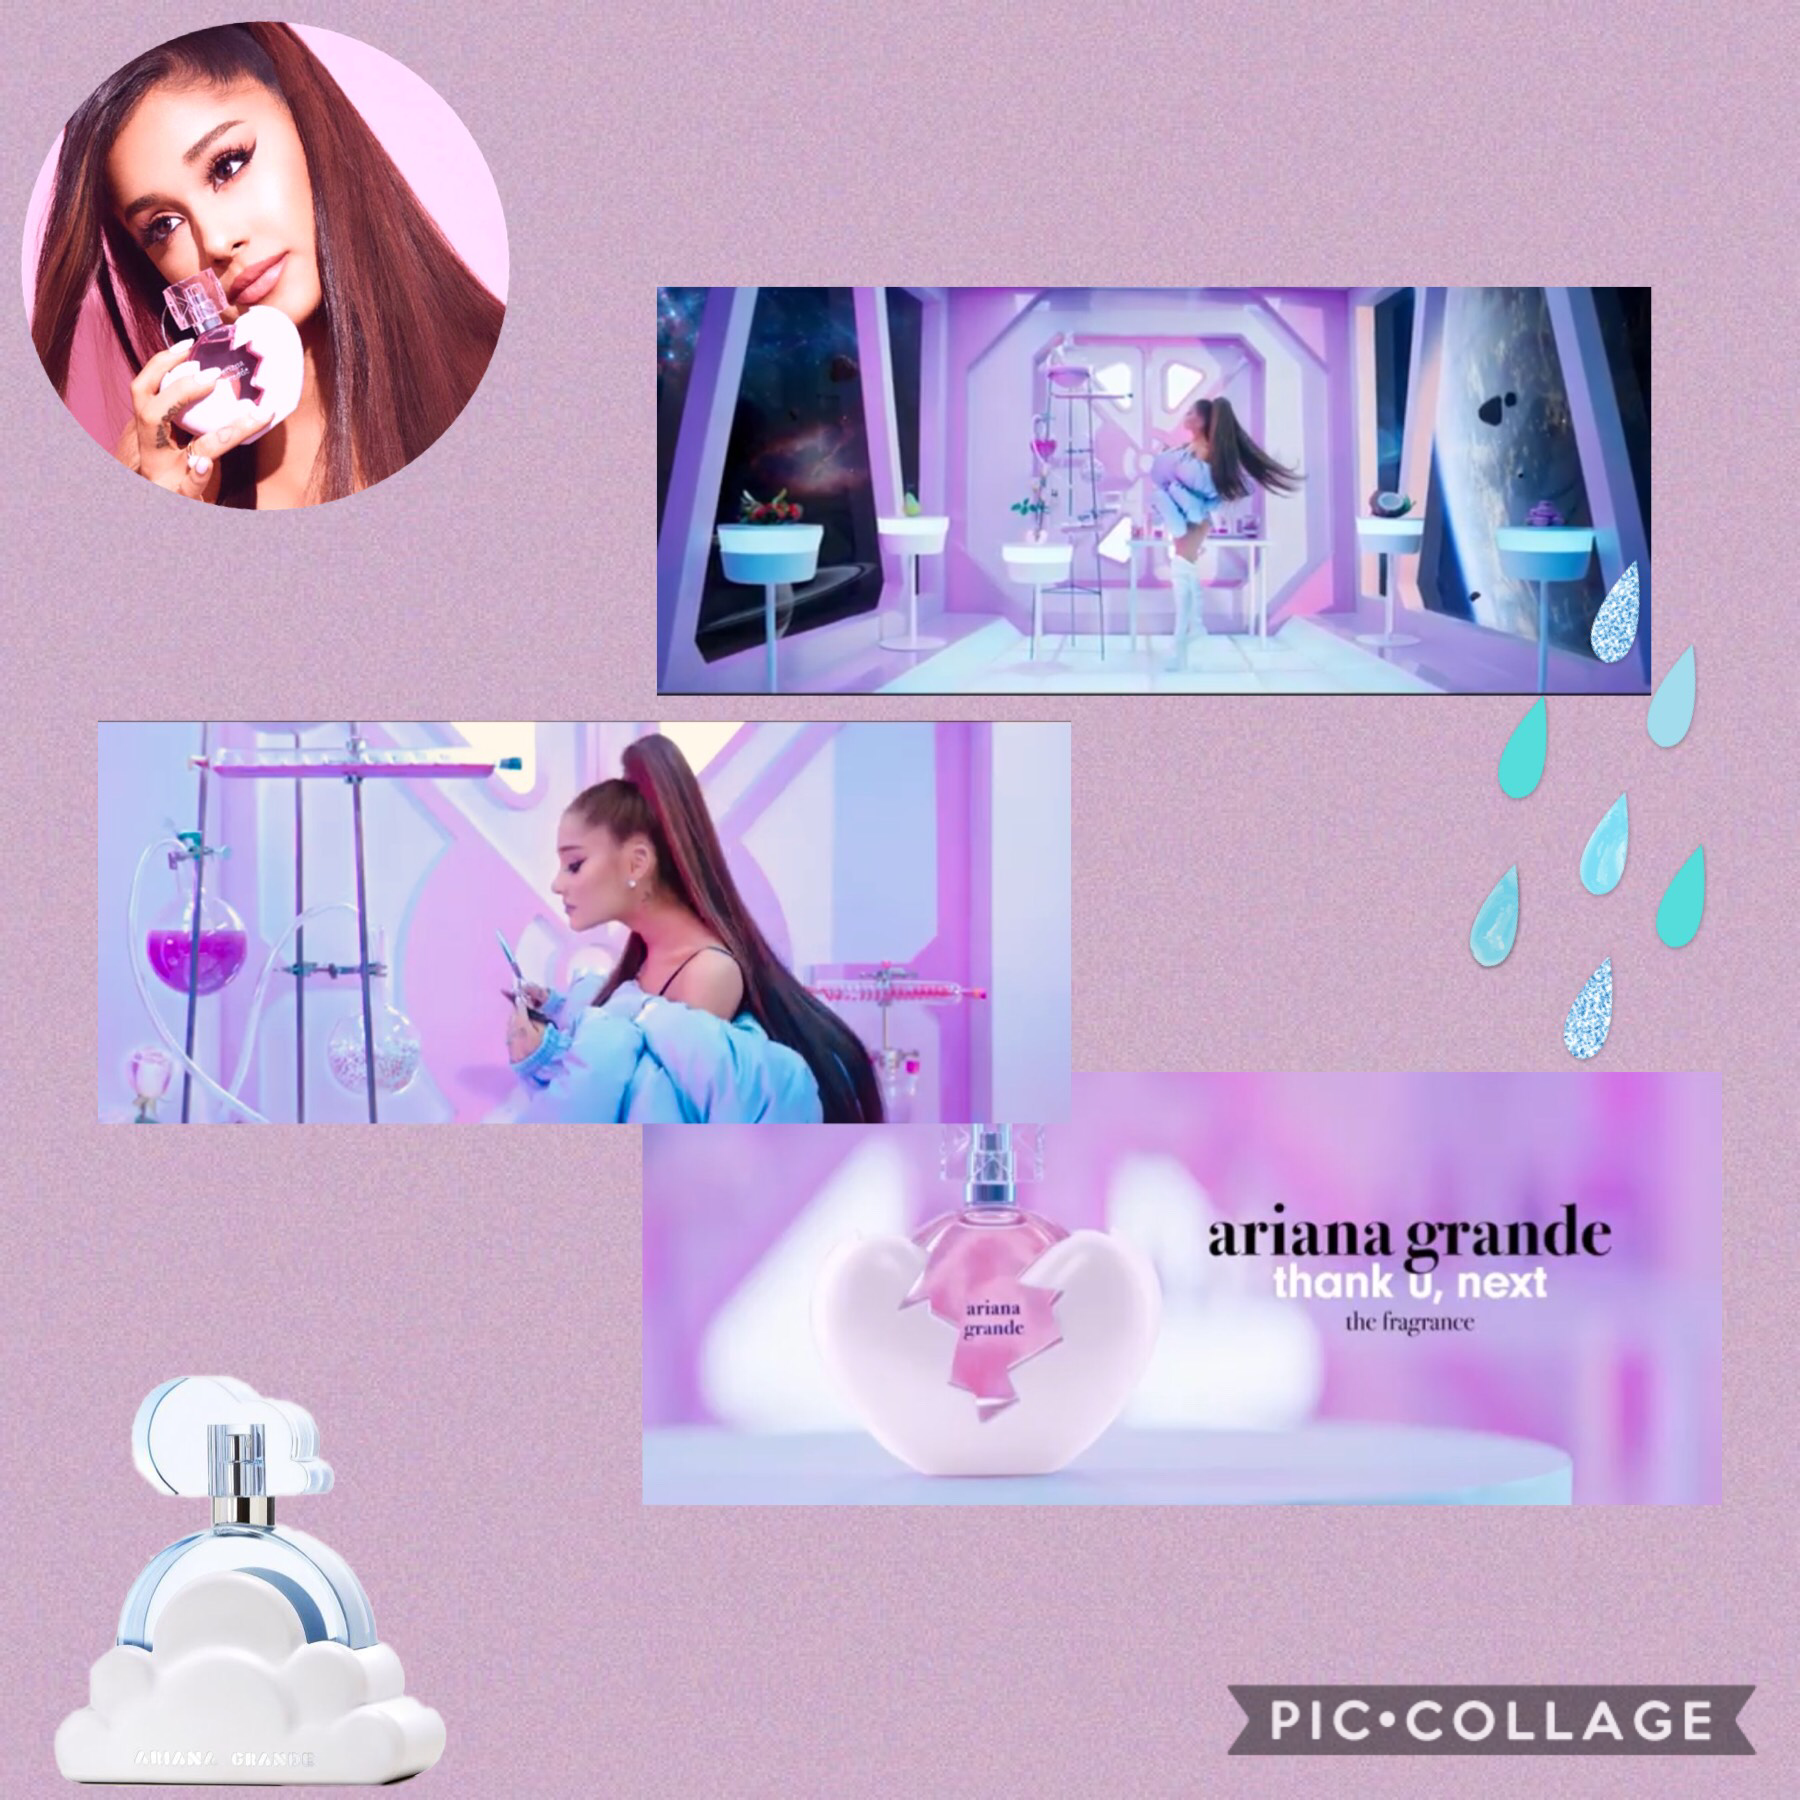 🖤 TAP🖤

Ariana Grande’s new perfume ‘thank u, next’ is now out! 🖤💕 In the pink laboratory photo you can spot strawberry, peach, coconut, purple donuts and a small pot plant. Maybe these are some of the ingredients? 🤔